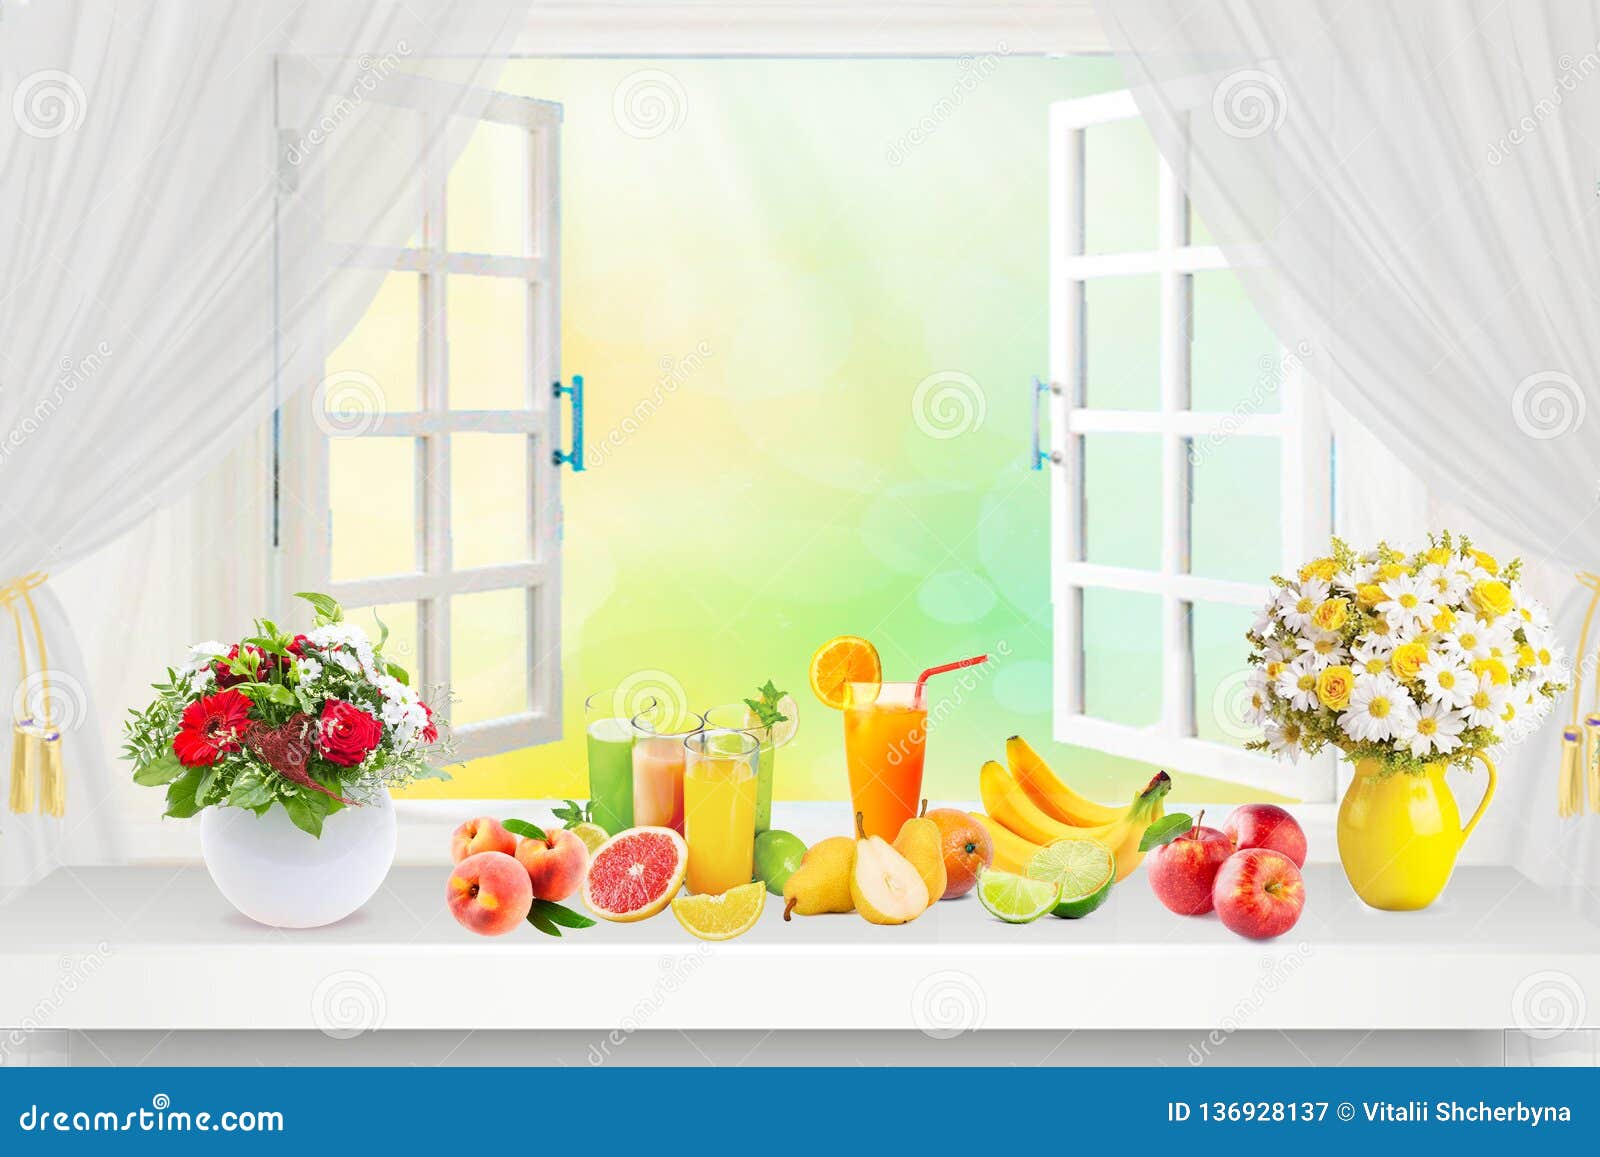 Healthy Morning, Assortment Of Fruit Smoothies Against A Open Window ... Open Window At Morning